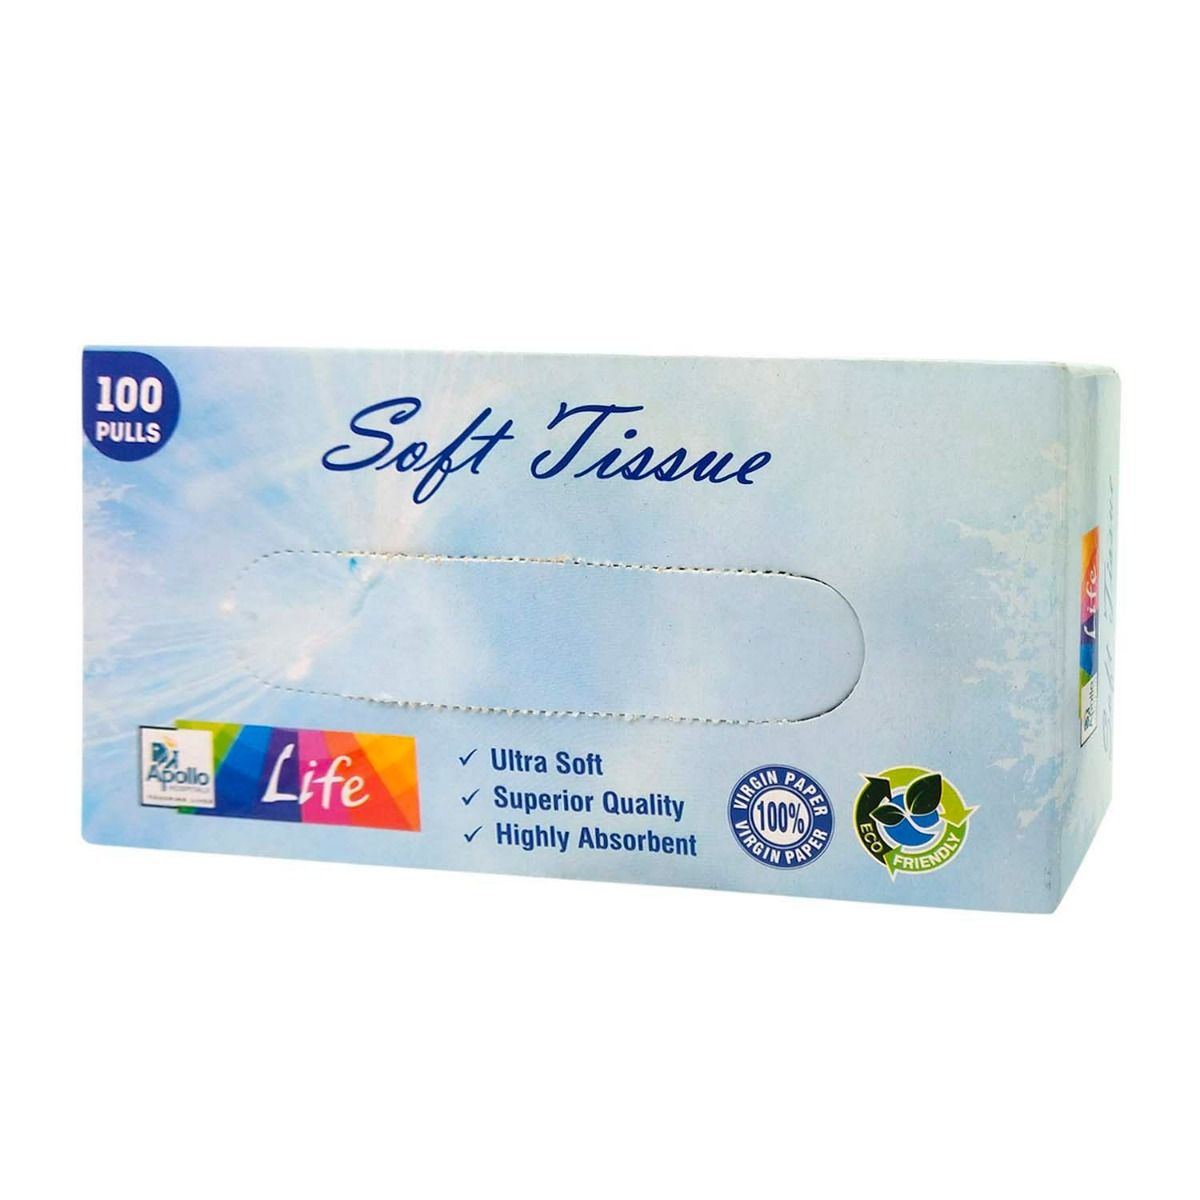 Apollo Life Soft Tissue Pulls, 100 Count, Pack of 1 